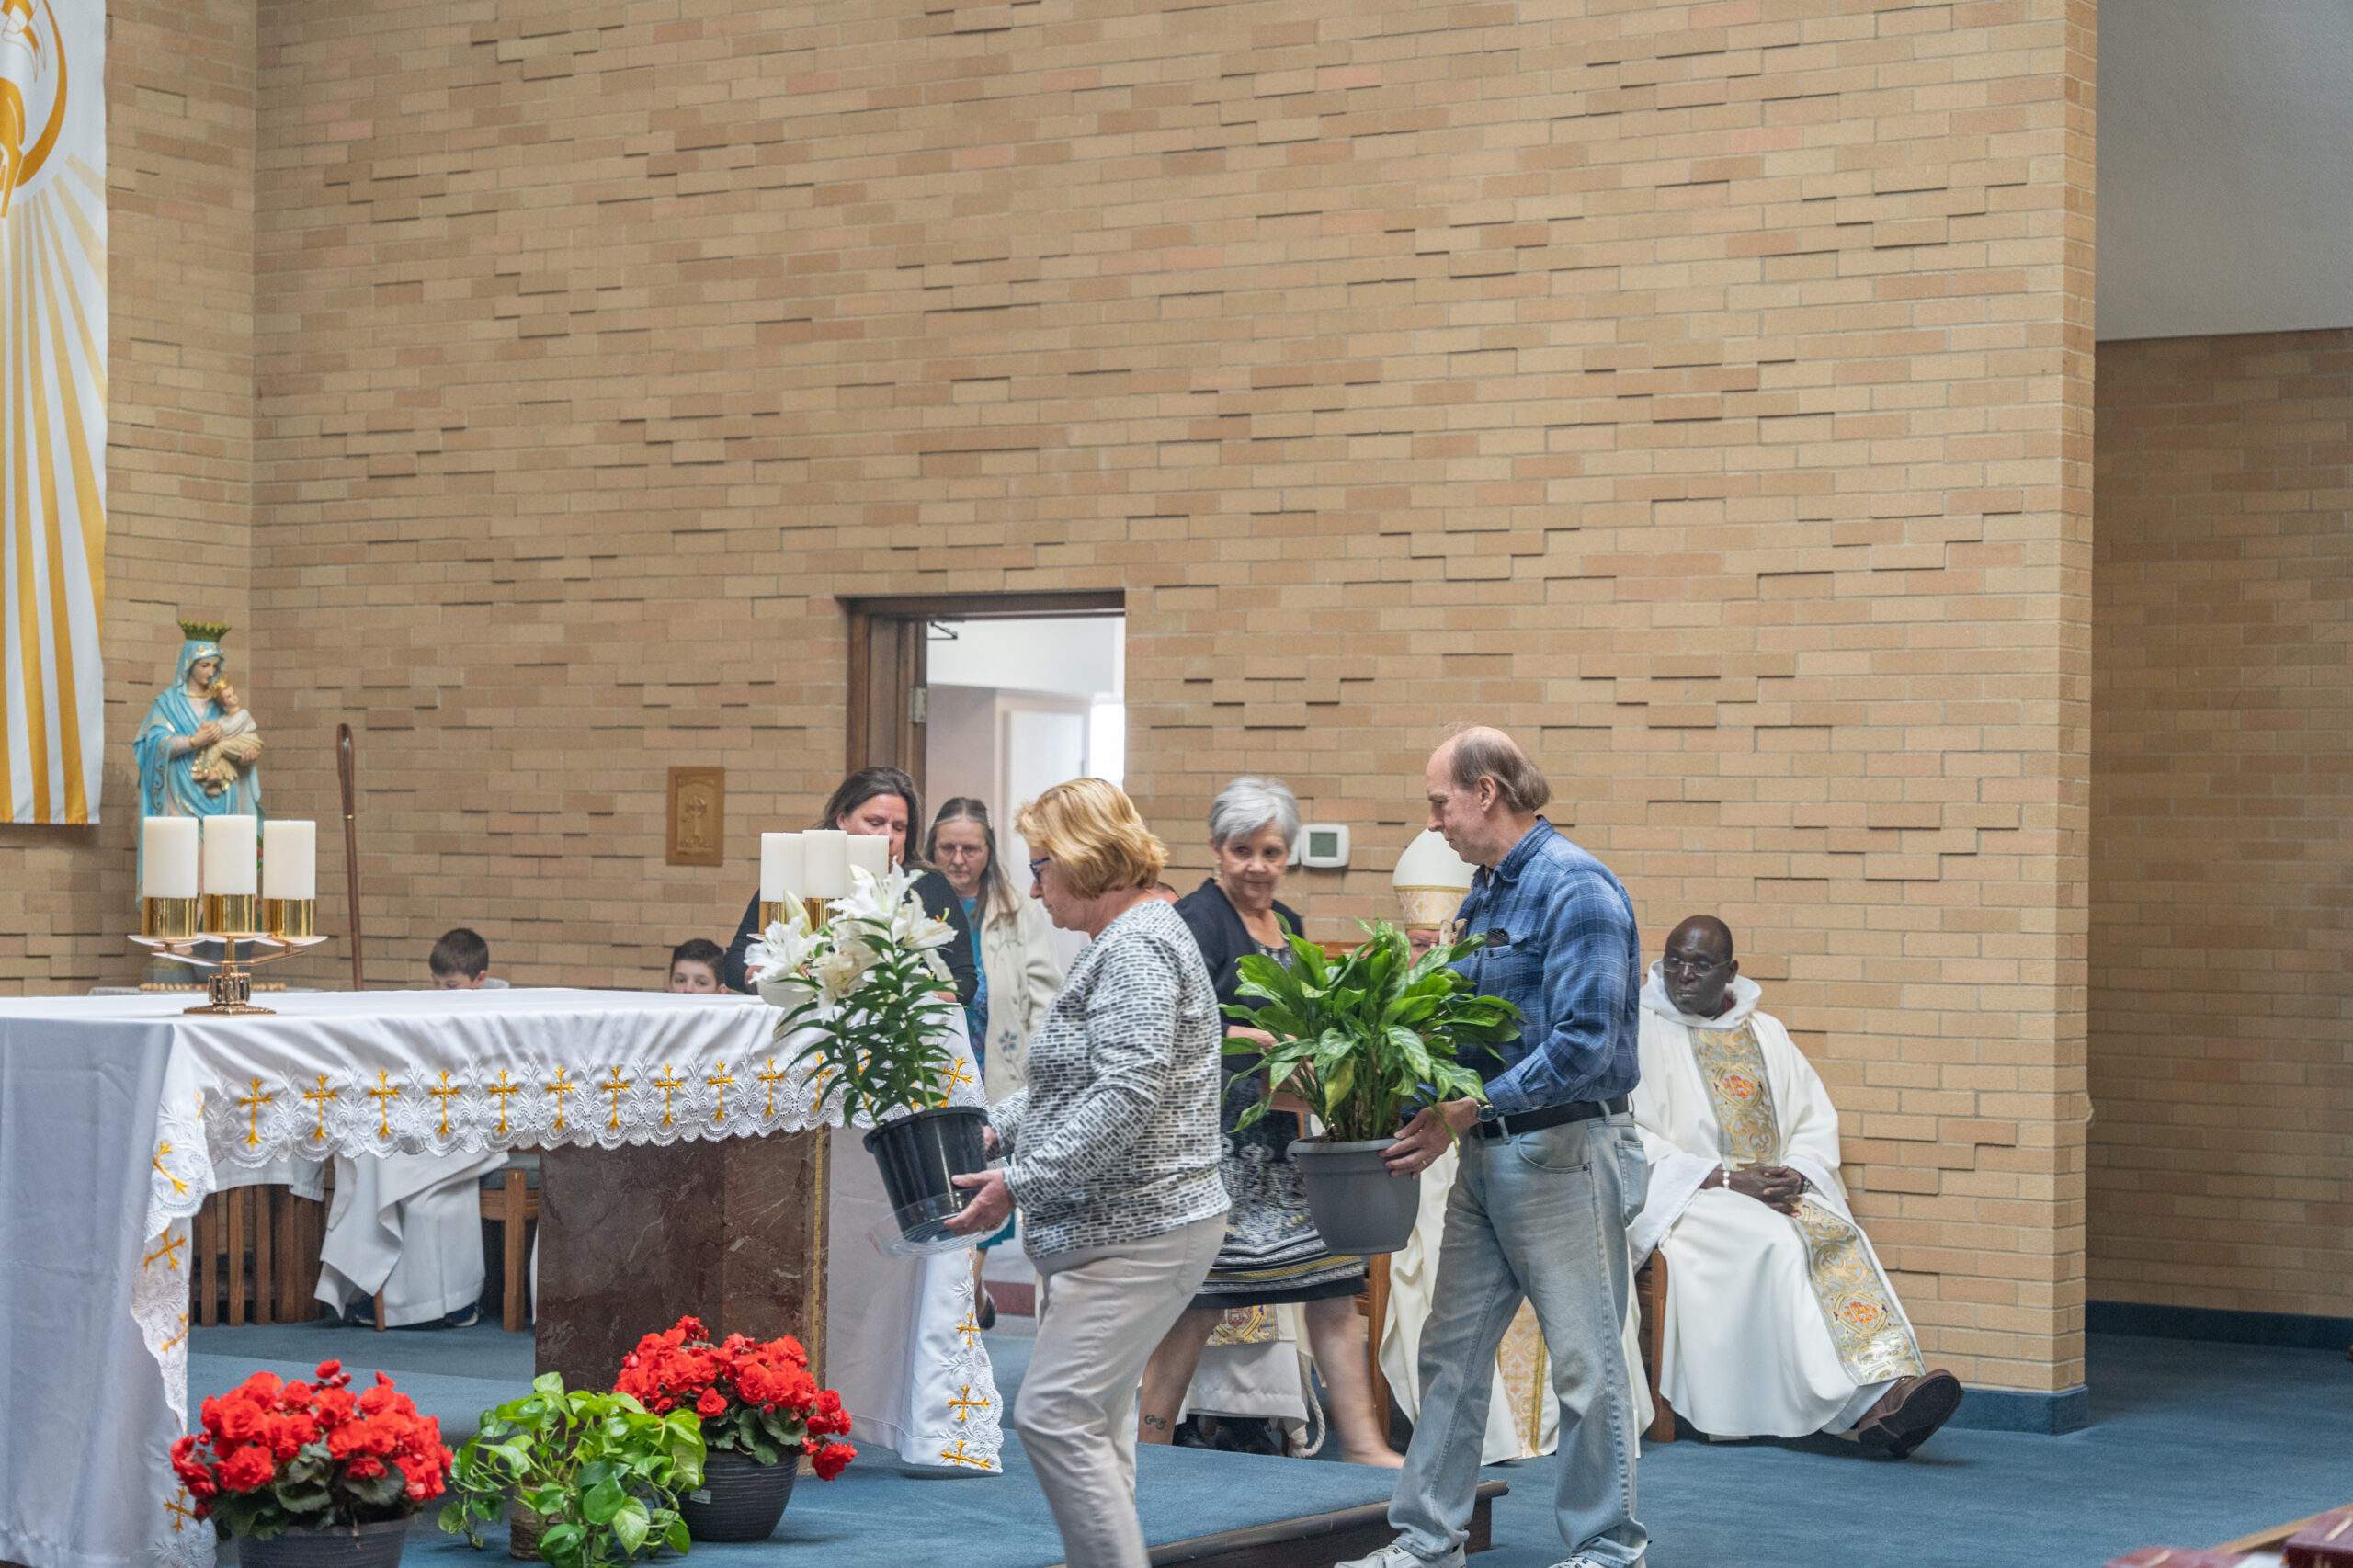 Parishioners bring forward flowers to decorate the altar at St. Mary Parish in Orwell. Photo by Brian Keith